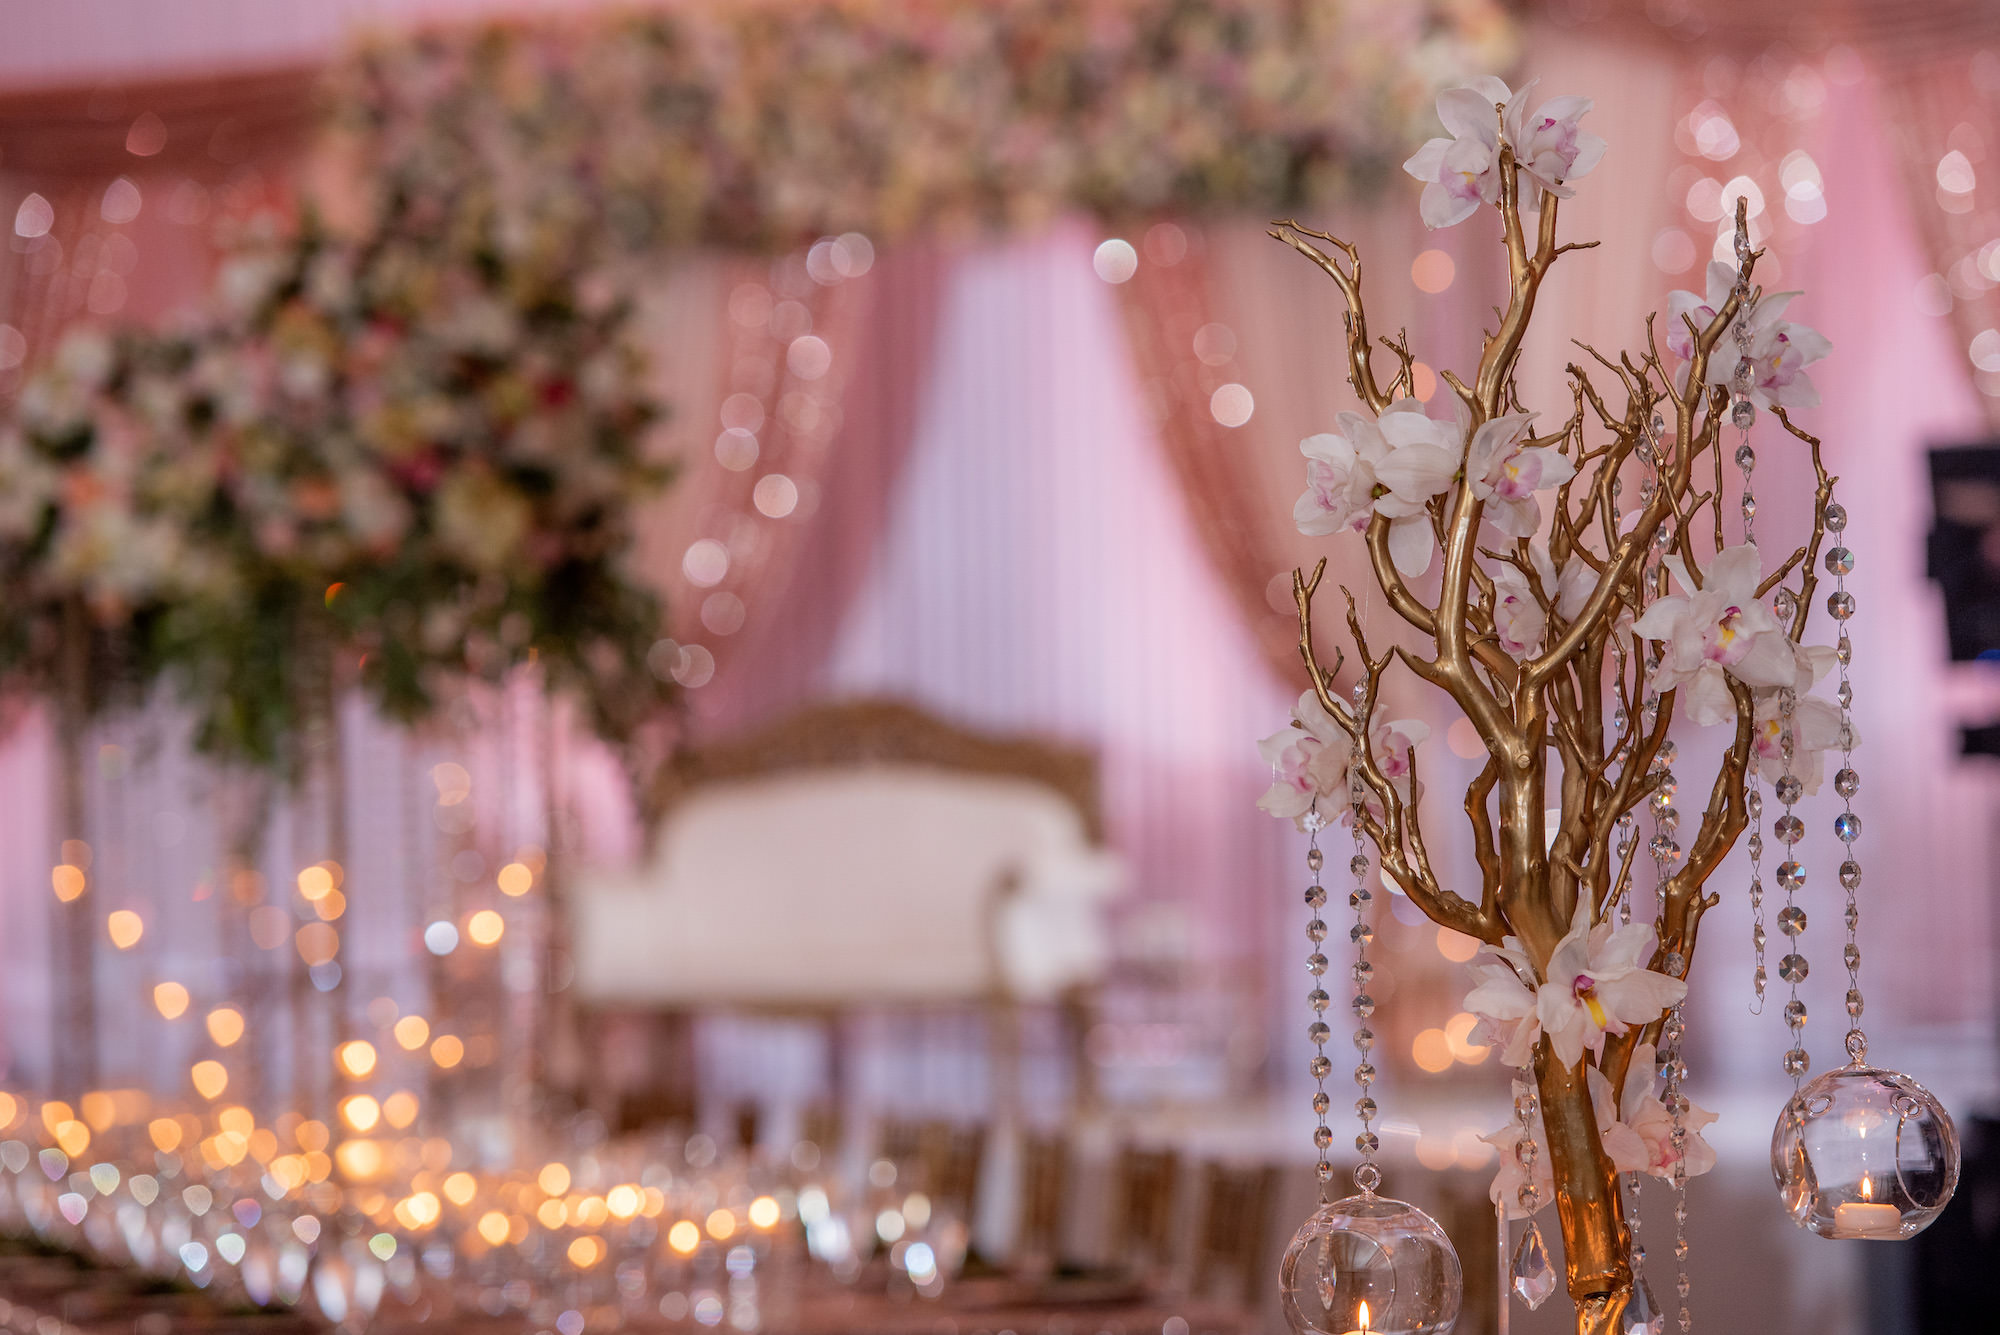 Modern Luxurious Ballroom Wedding Reception Decor, Small Floral Centerpiece with Hanging Tea Lights, Pink Flowers, White Florals, Ivory Stems, Tree Inspired Stand with Crystals, Sequined Table Linens